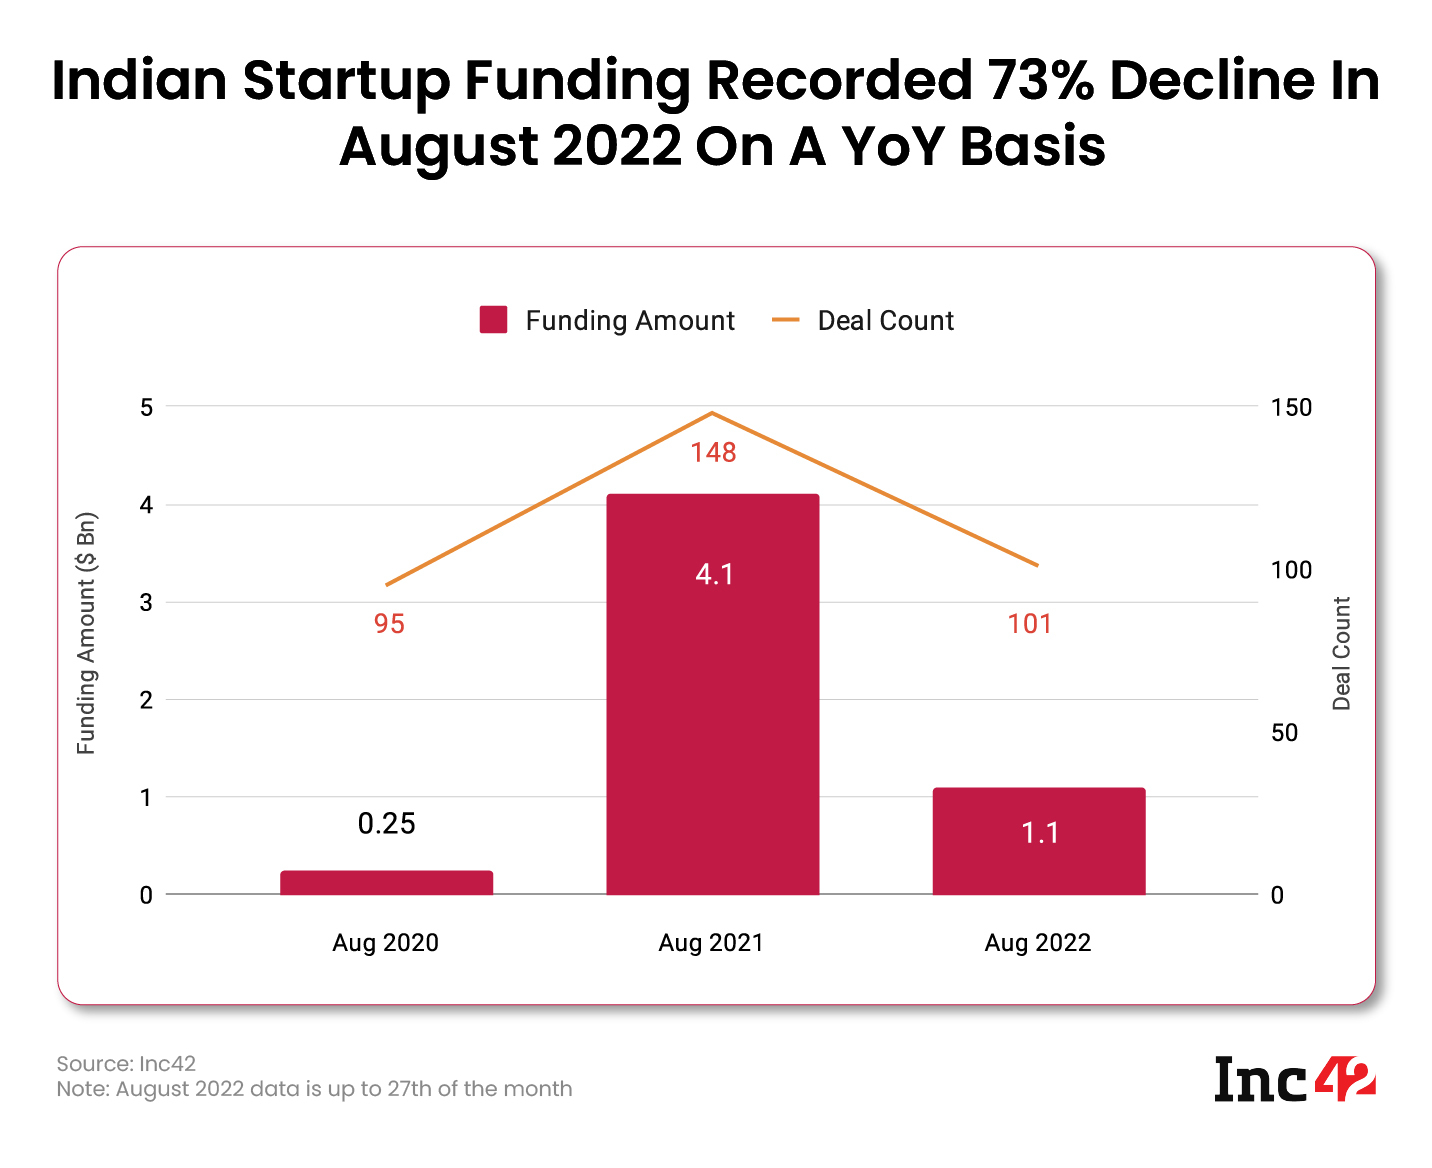 Indian Startup Funding Recorded 73% Decline in August 2022 on a YoY Basis